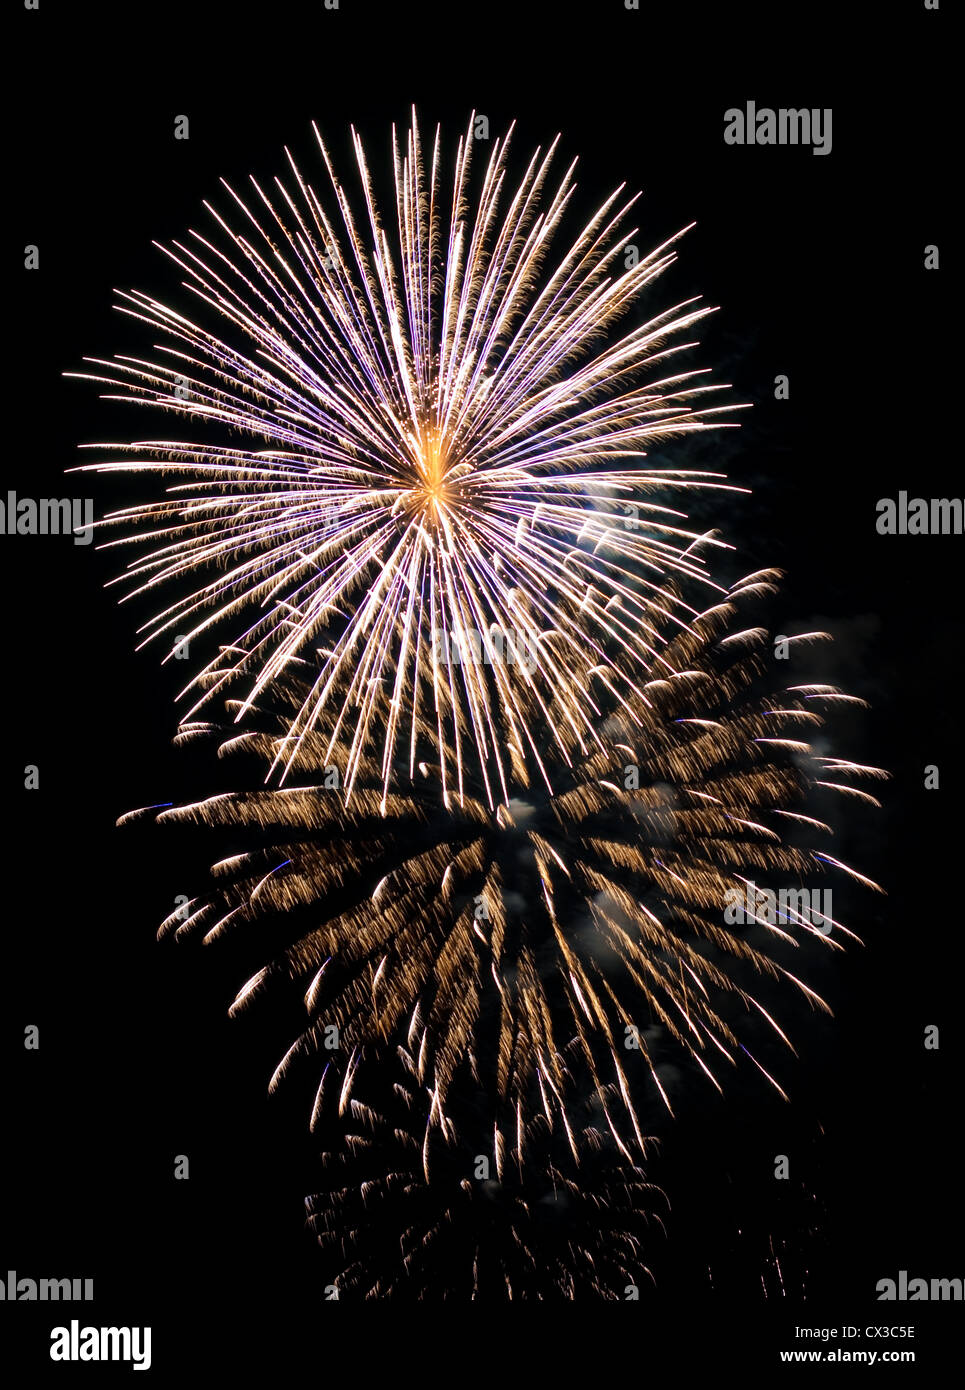 High quality firework over night city made with long exposure time Stock Photo